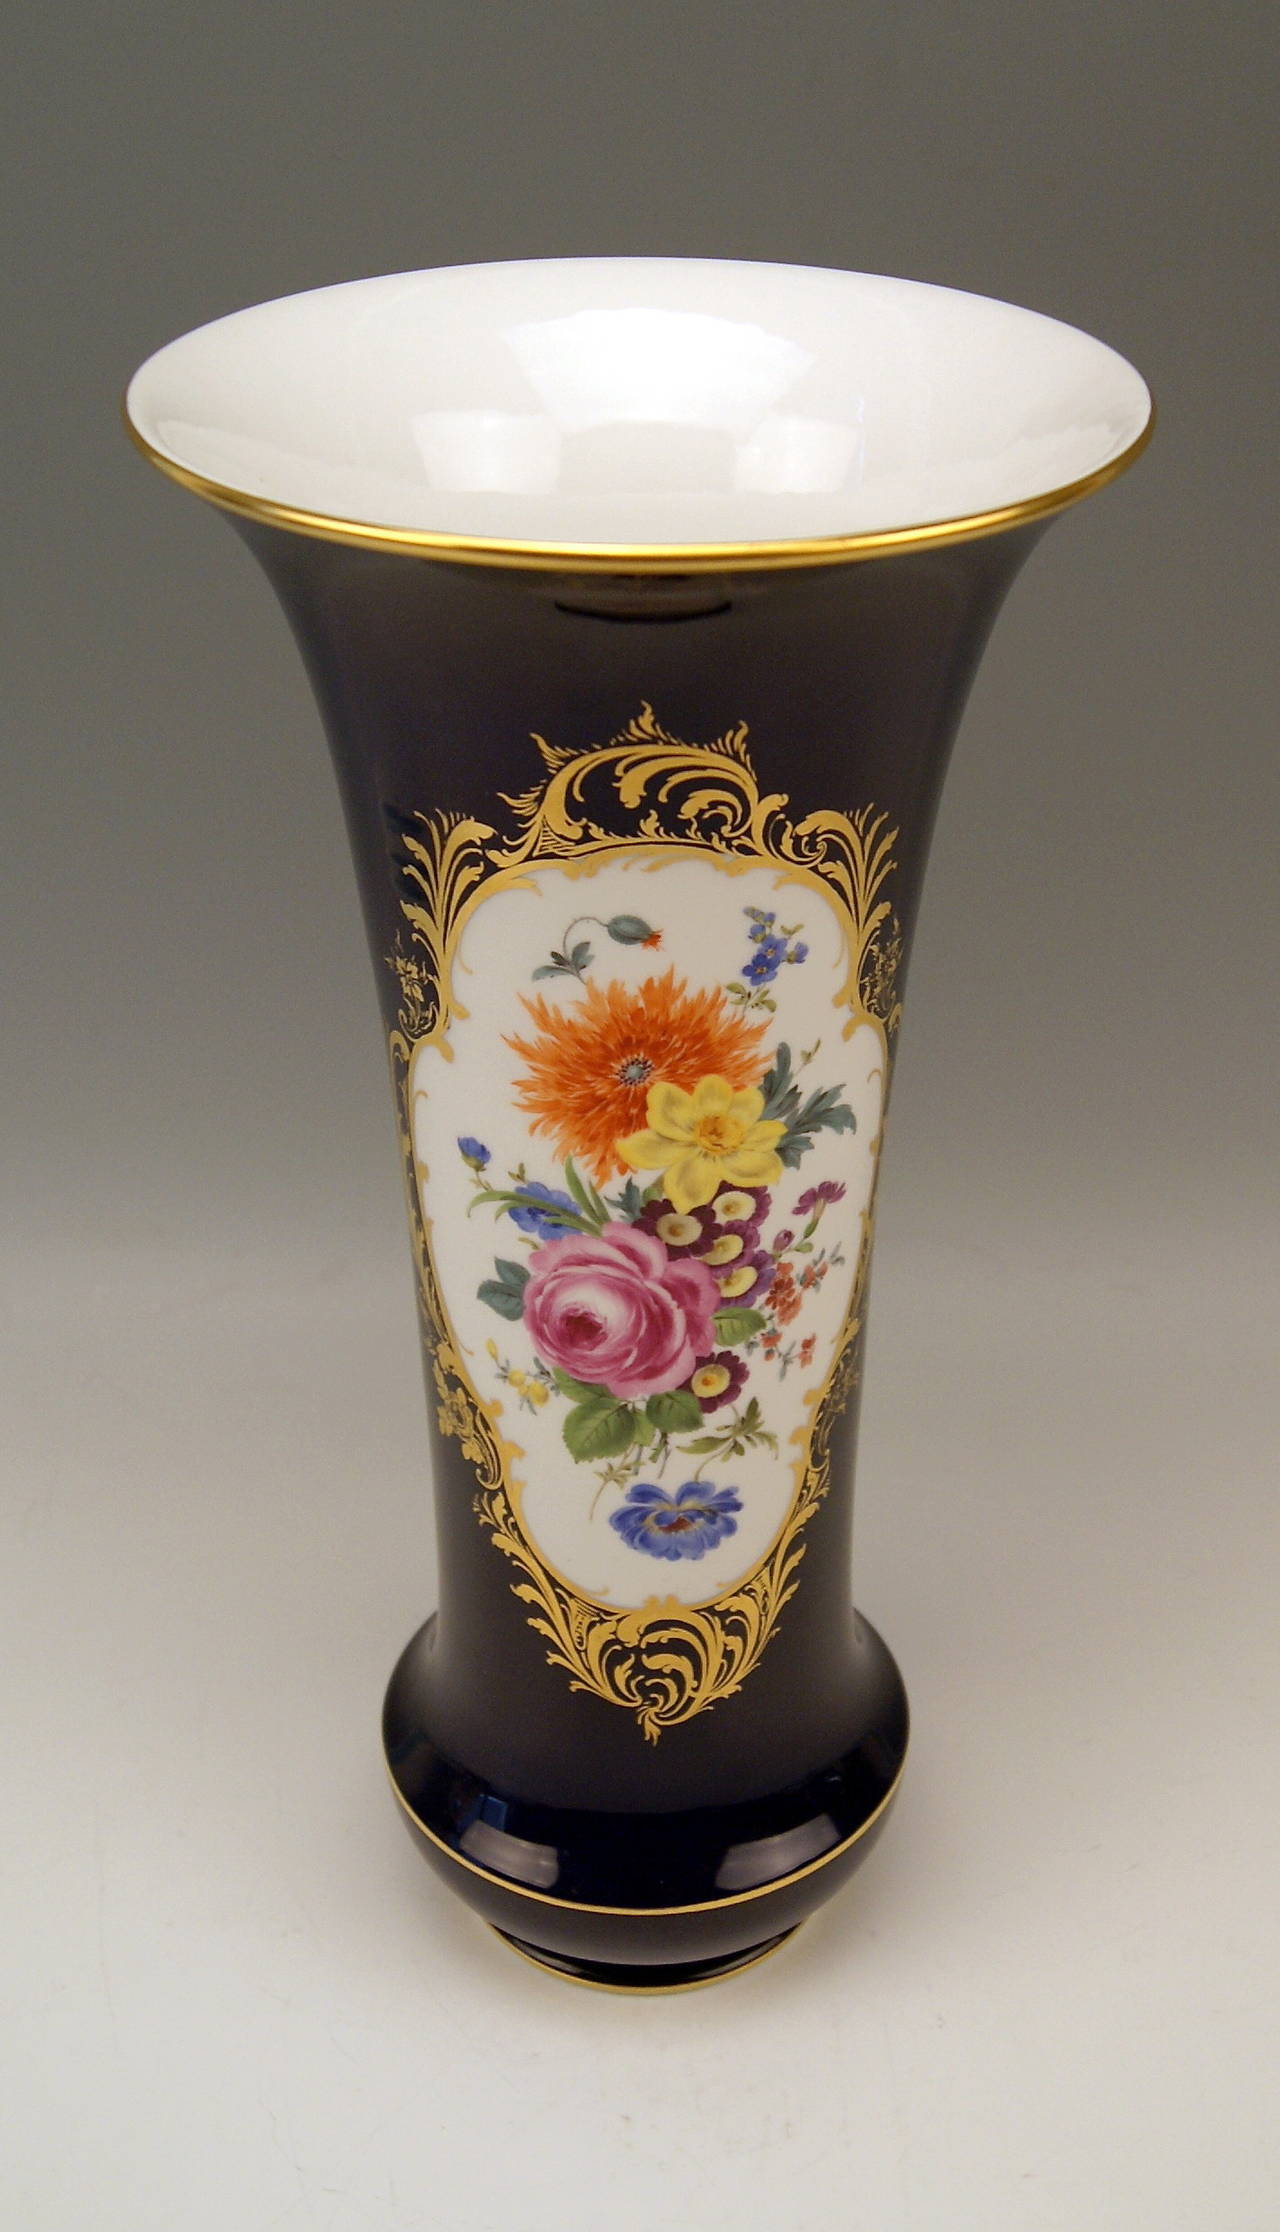 Gorgeous Tall Cobalt Blue Vase of Funneled Form Type.

MANUFACTORY:    MEISSEN

DATING:       made second half of 20th century   

MATERIAL:     
WHITE PORCELAIN, GLOSSY FINISH, FINEST FLOWER PAINTINGS

This stunning  MEISSEN VASE of